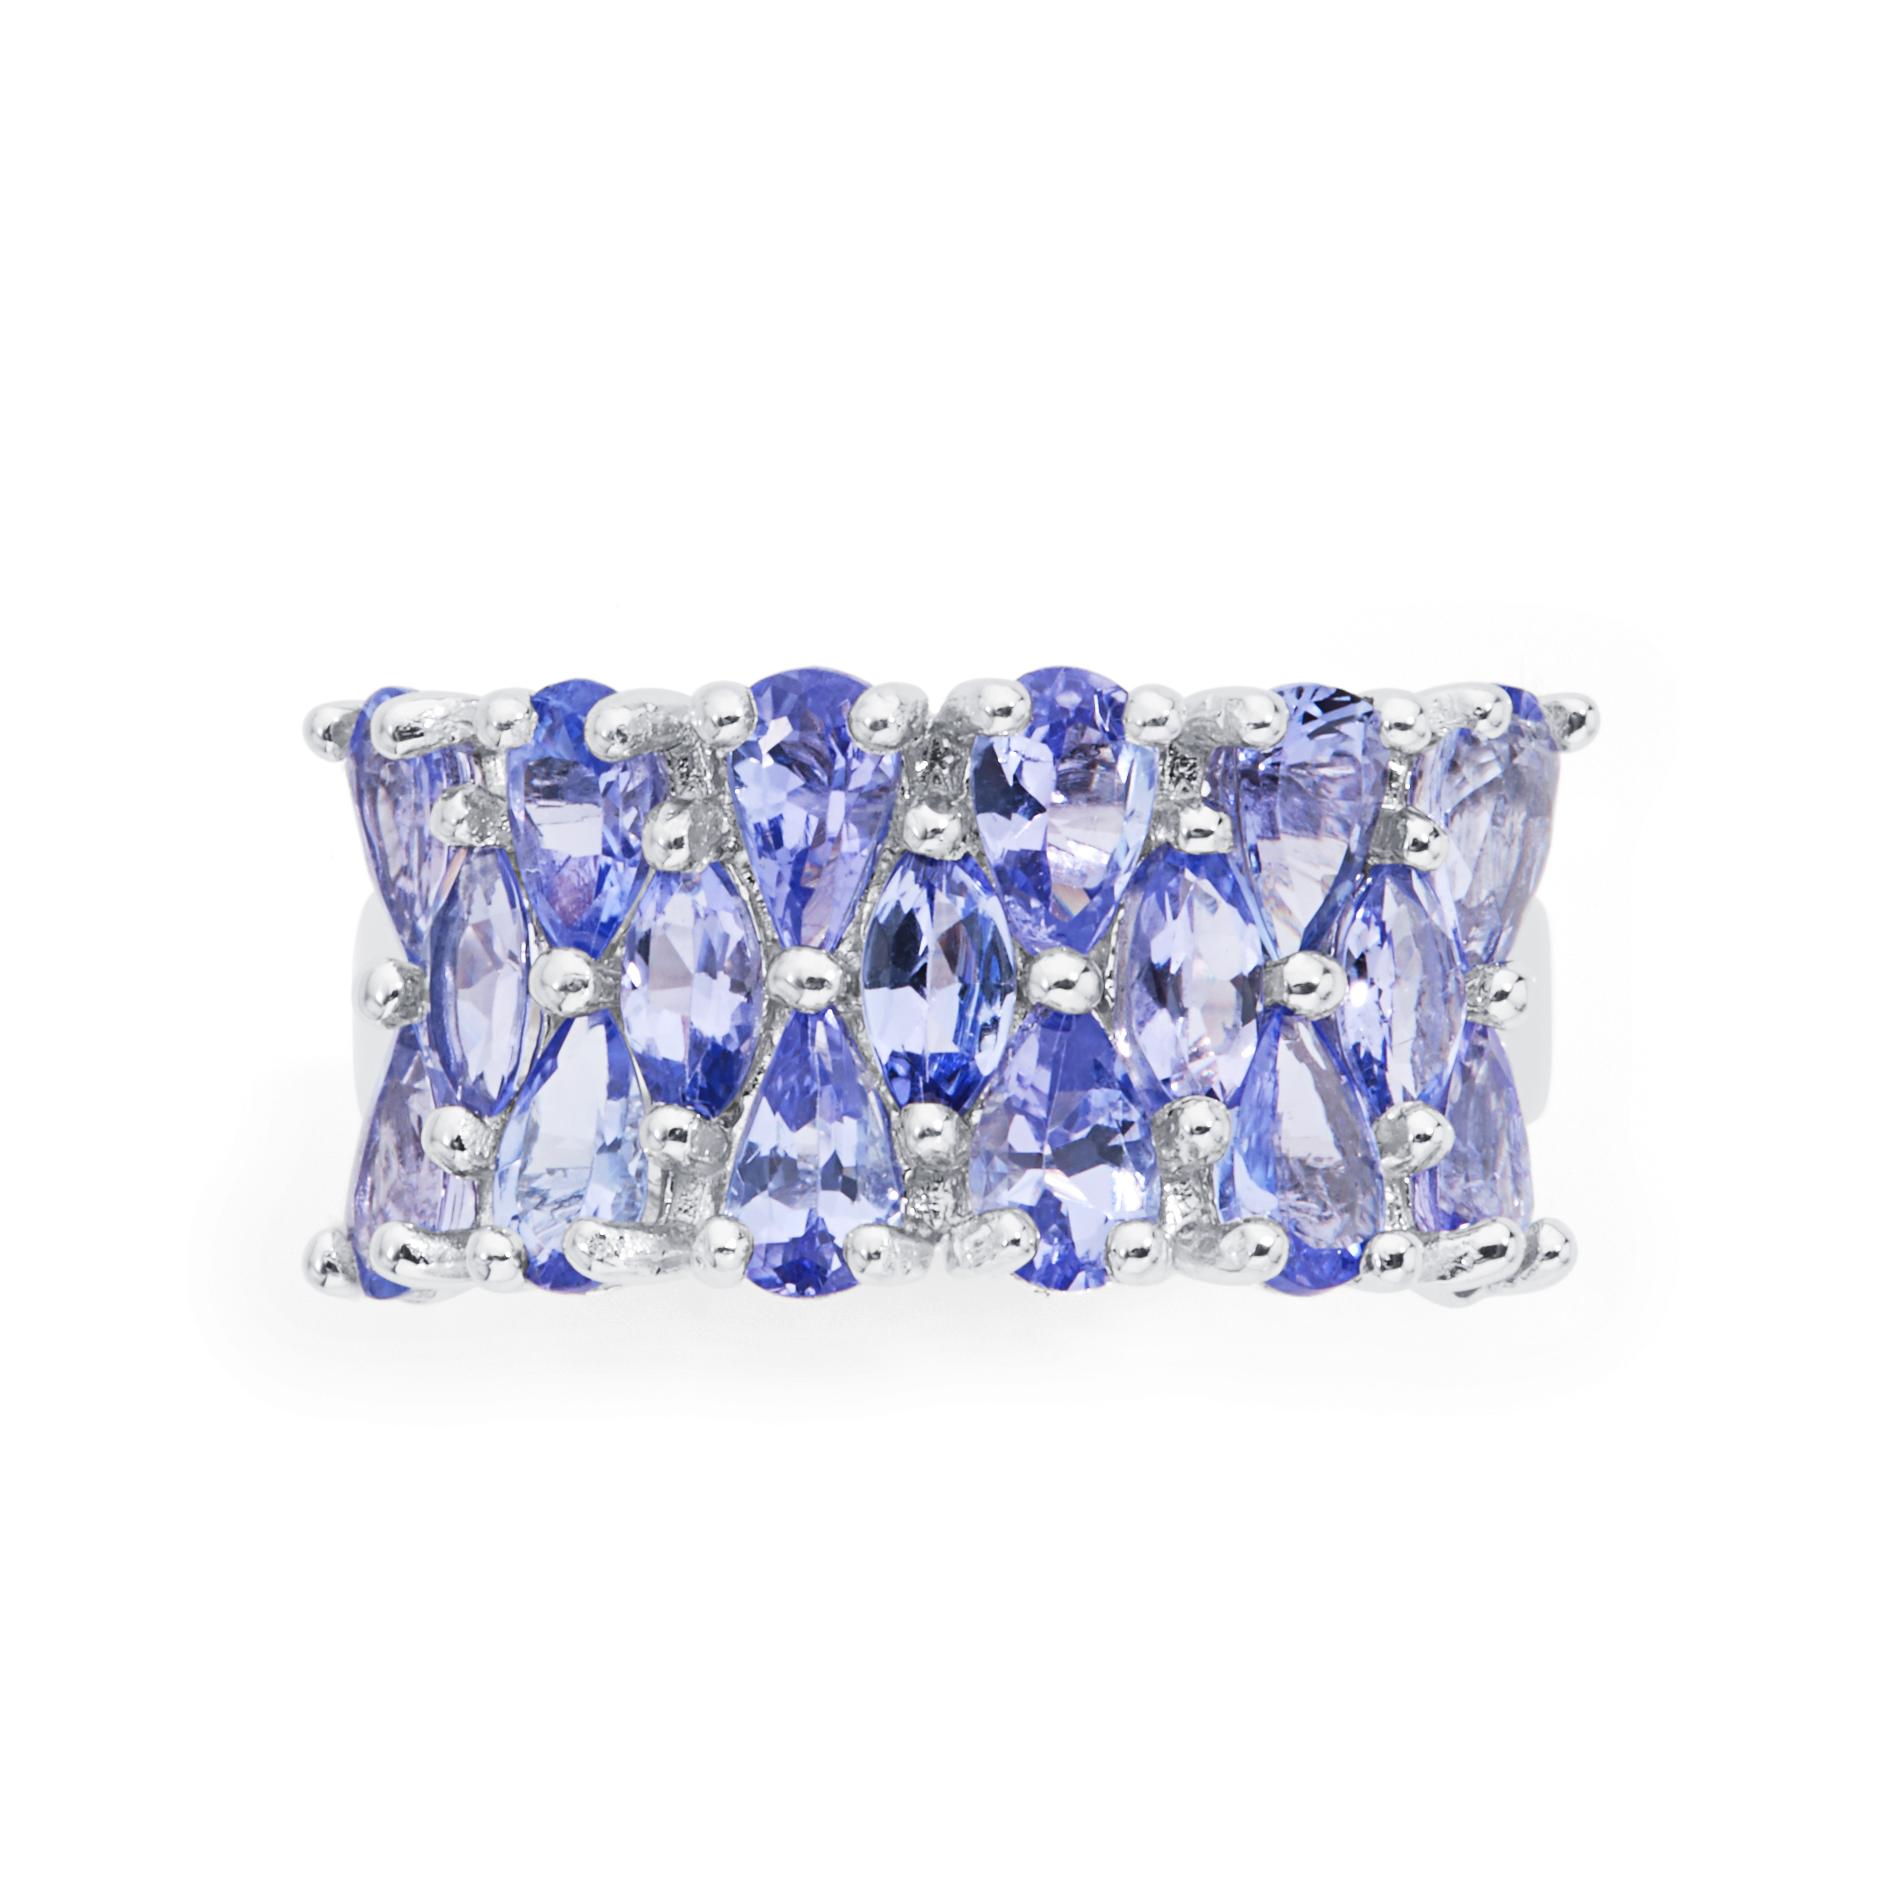 3.84 Cttw Prong Setting Tanzanite Sterling Silver Ring